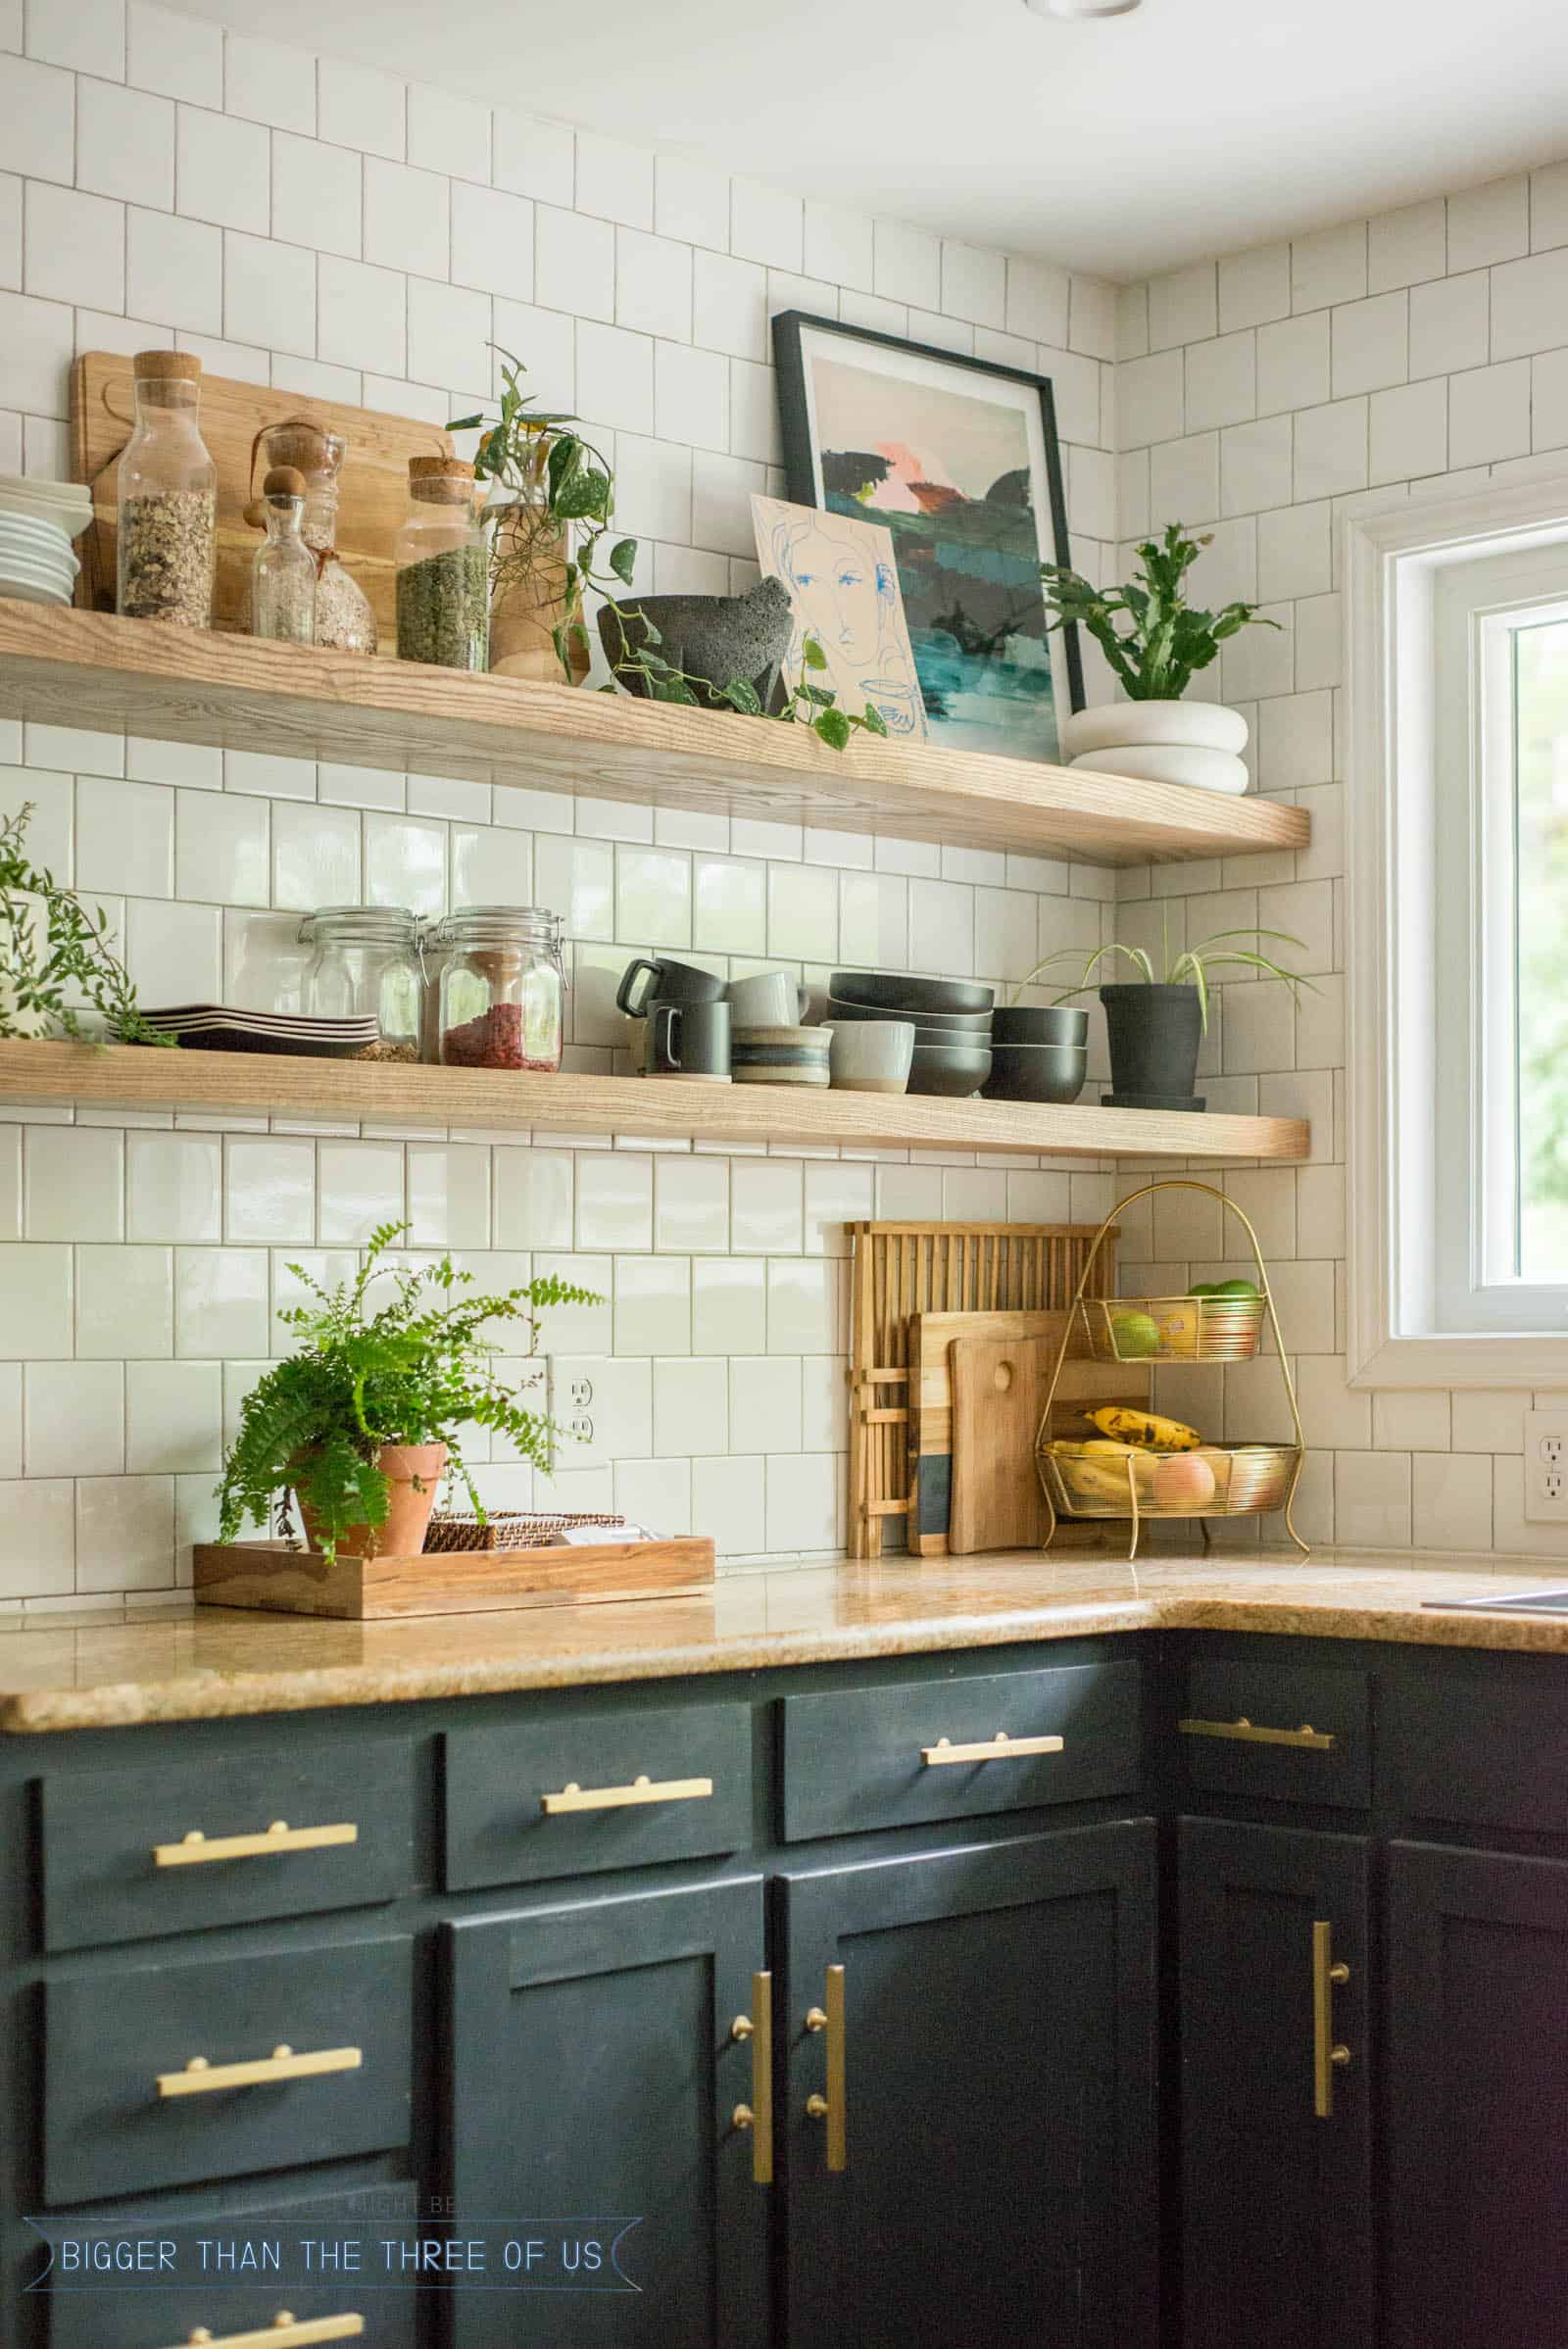 diy open shelving kitchen guide bigger than the three floating shelves that hold lot weight small corner pantry bar support brackets storage rack shaped shelf command mirror